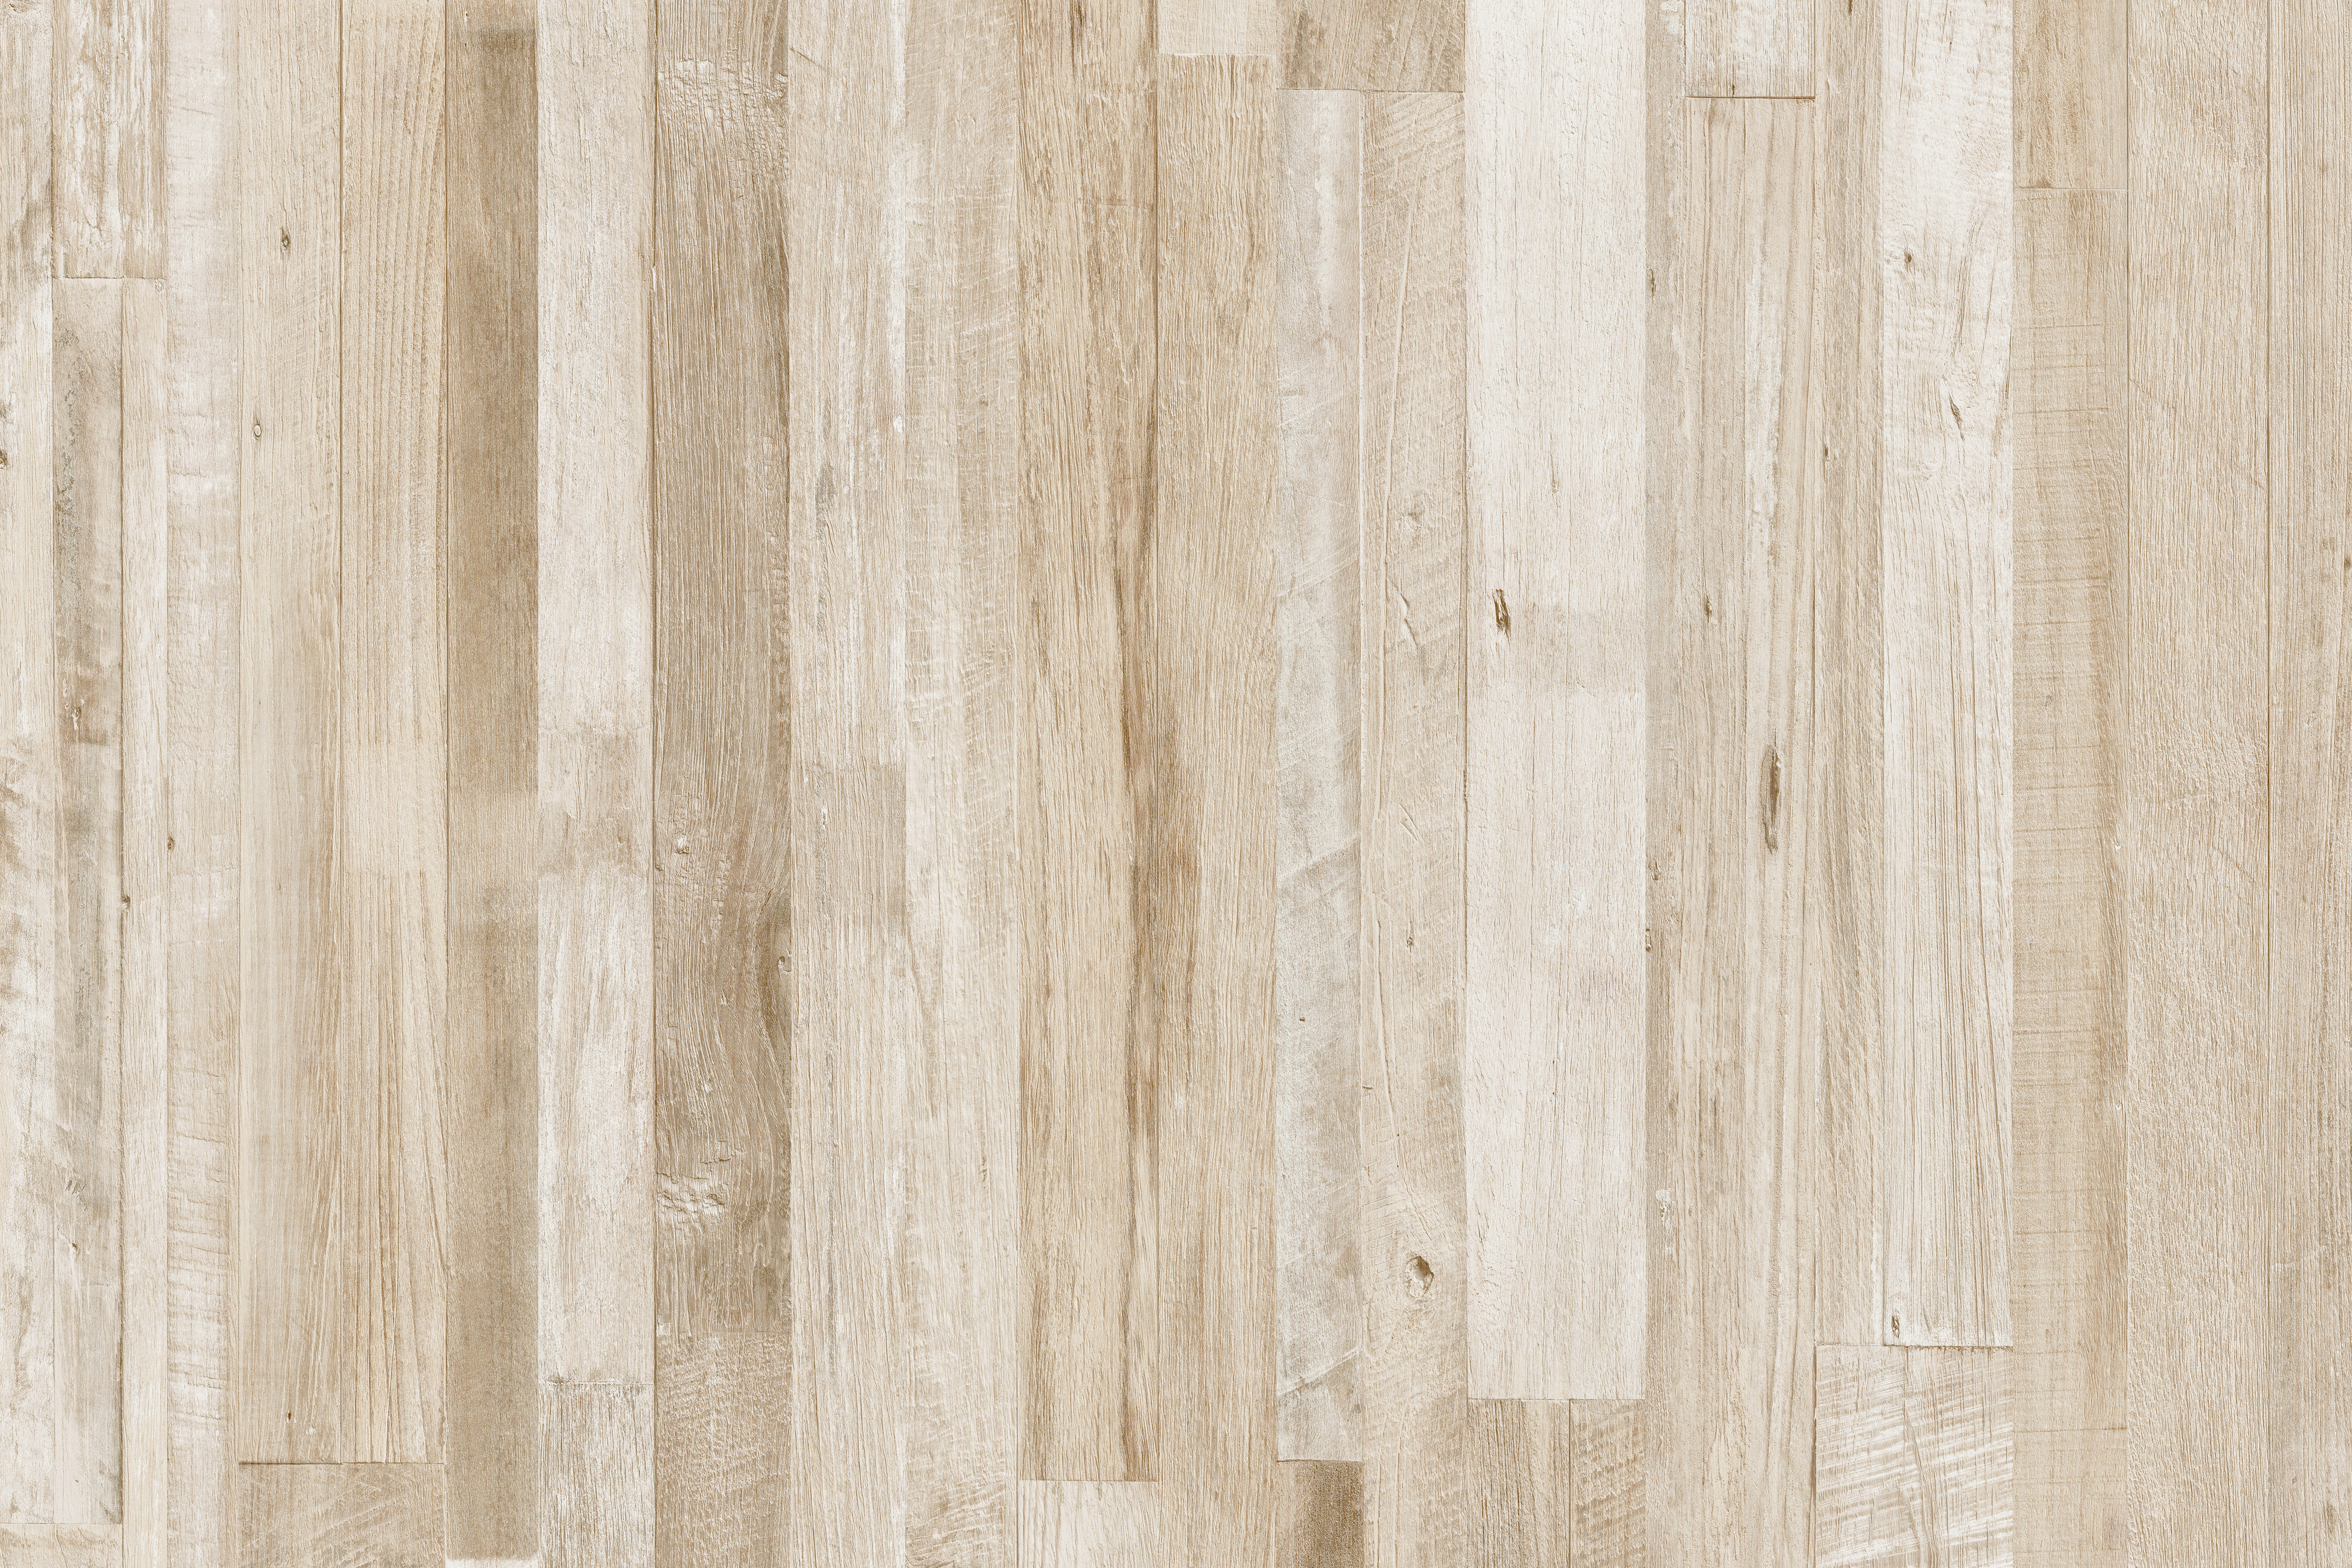 Mixed Species Wood Flooring Pattern for Background Texture 